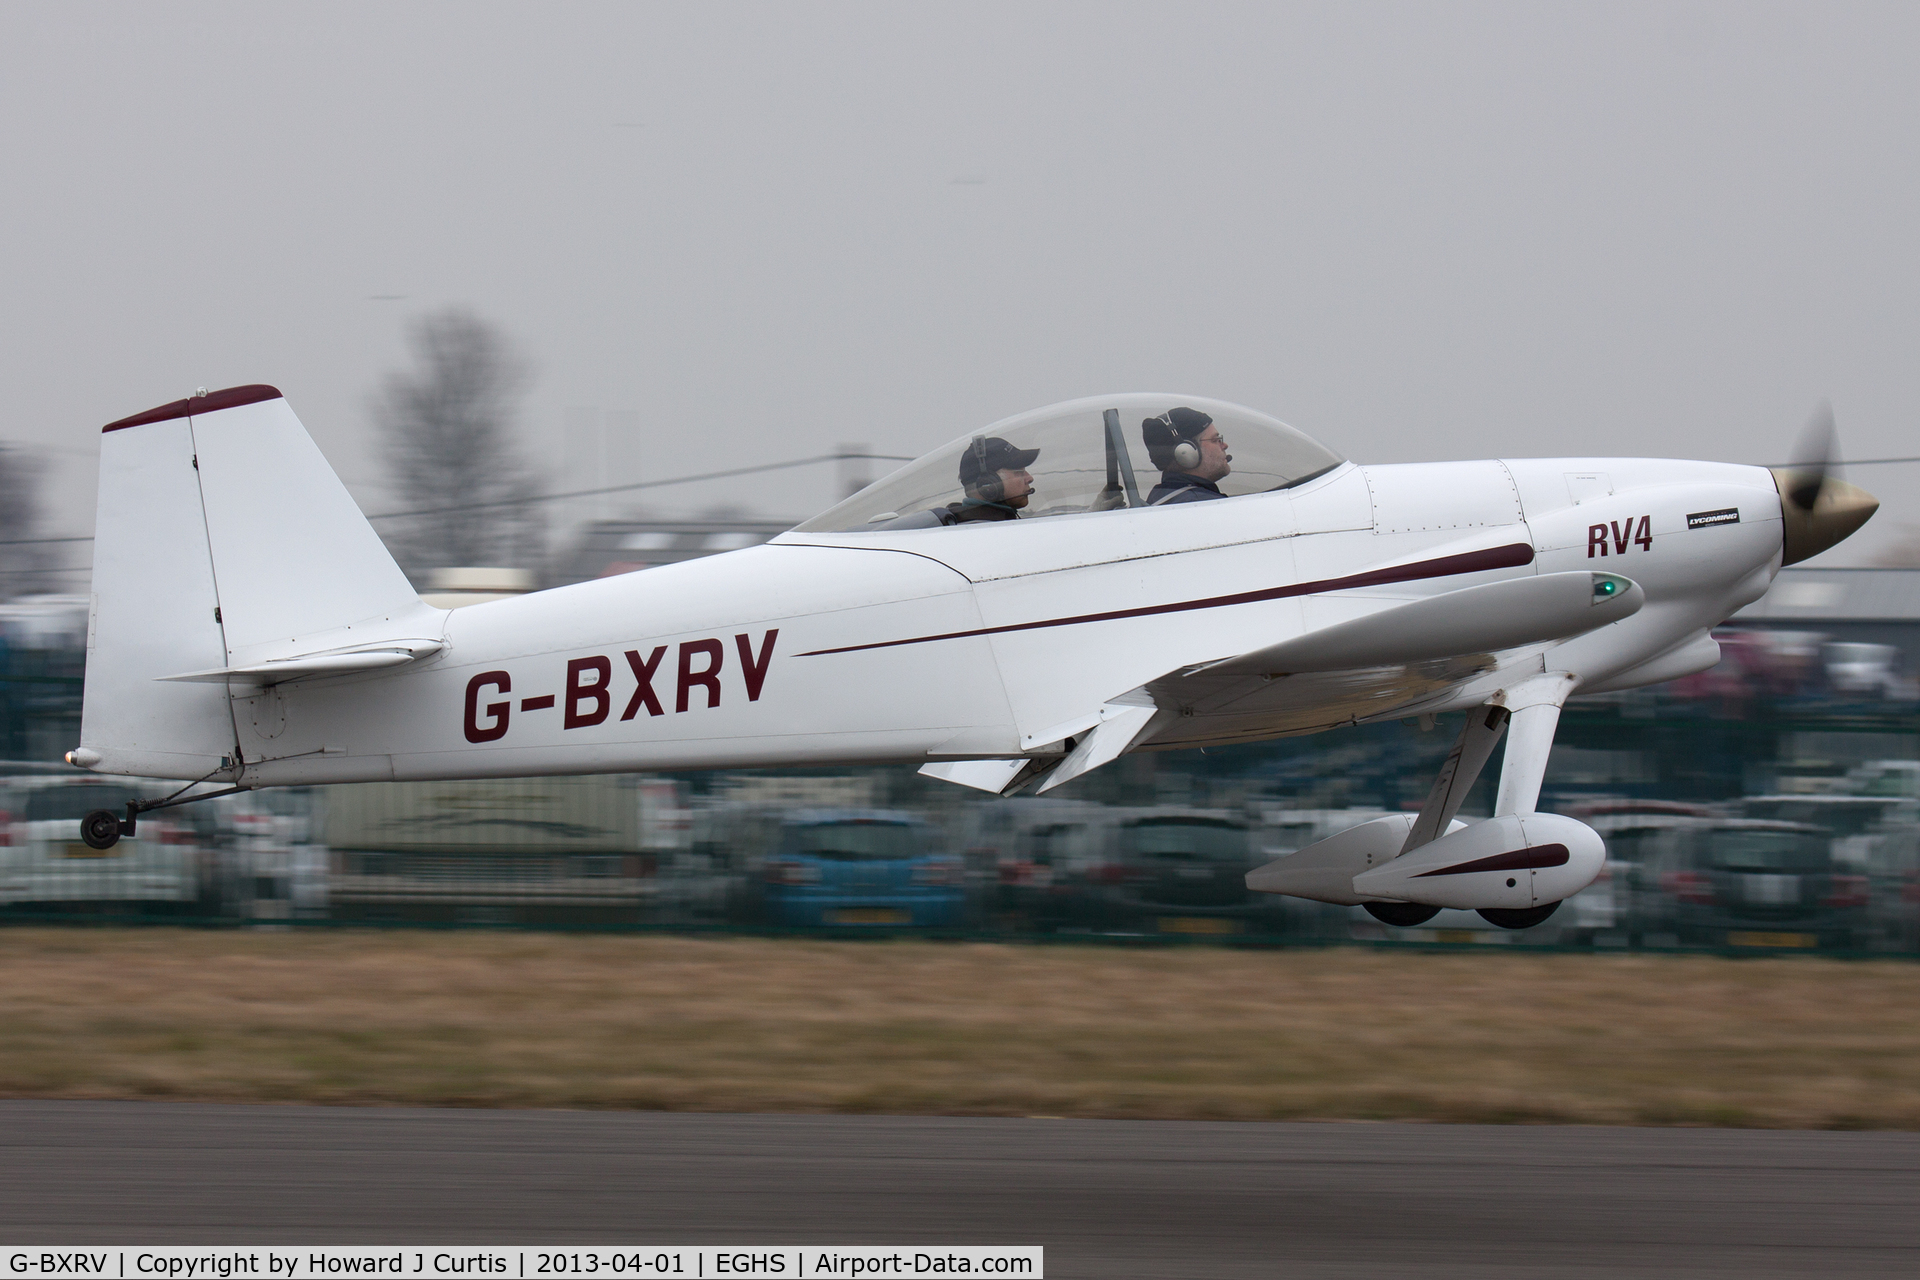 G-BXRV, 2002 Vans RV-4 C/N PFA 181-12482, At the LAA Fly-In and HMS Dipper 70th Anniversary Event. Privately owned.